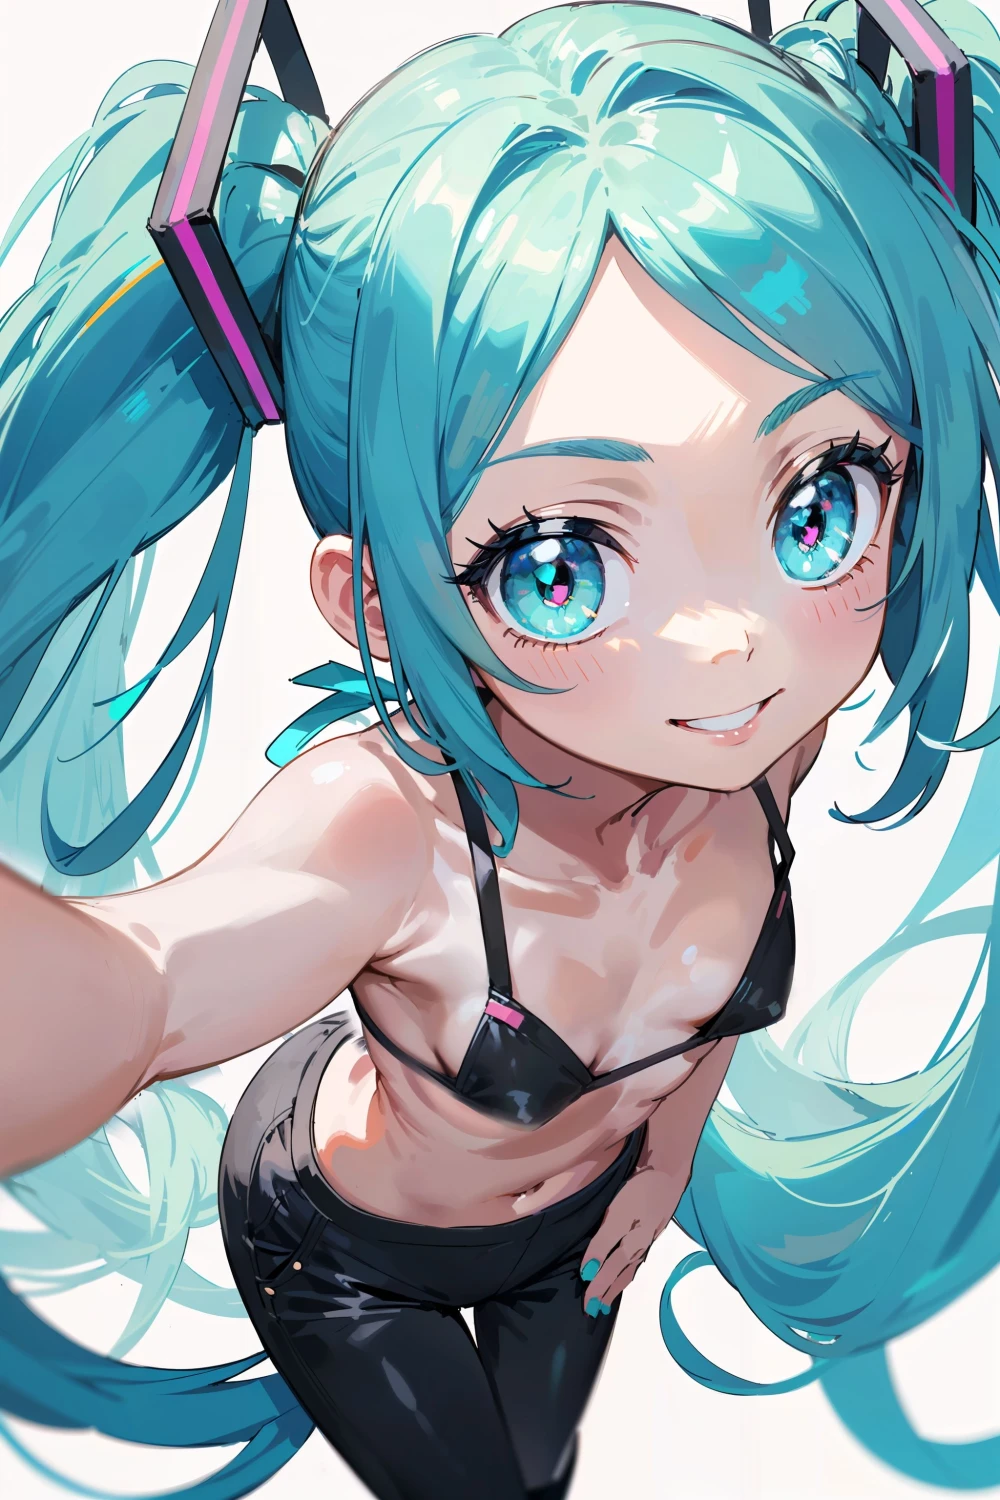 hatsune-miku-anime-style-all-ages-2-45